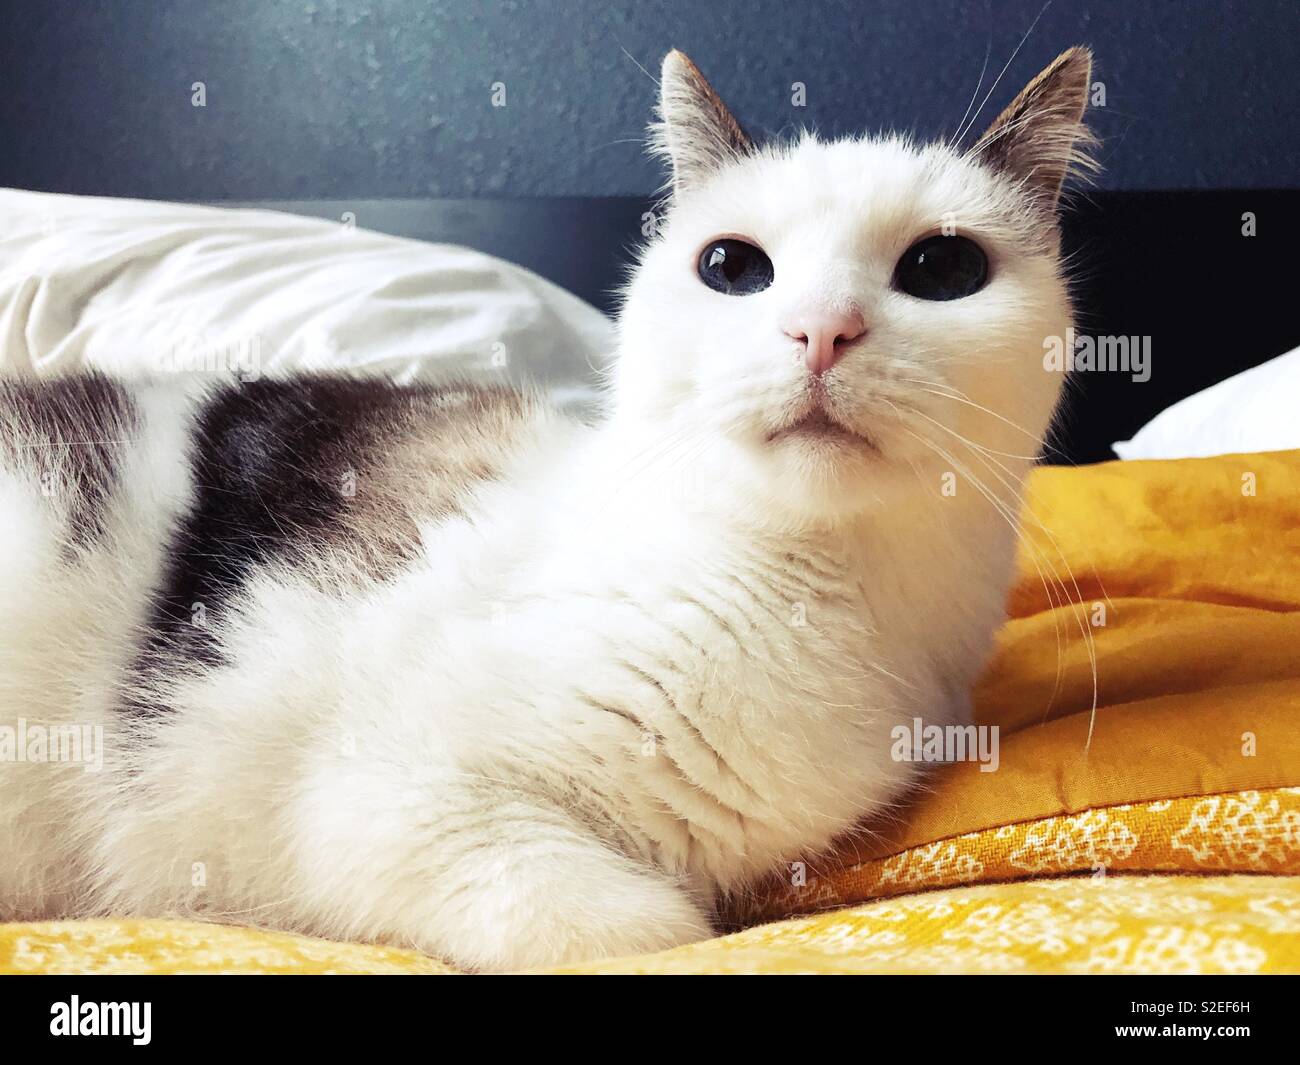 A white cat with big eyes lying on a bed. Stock Photo